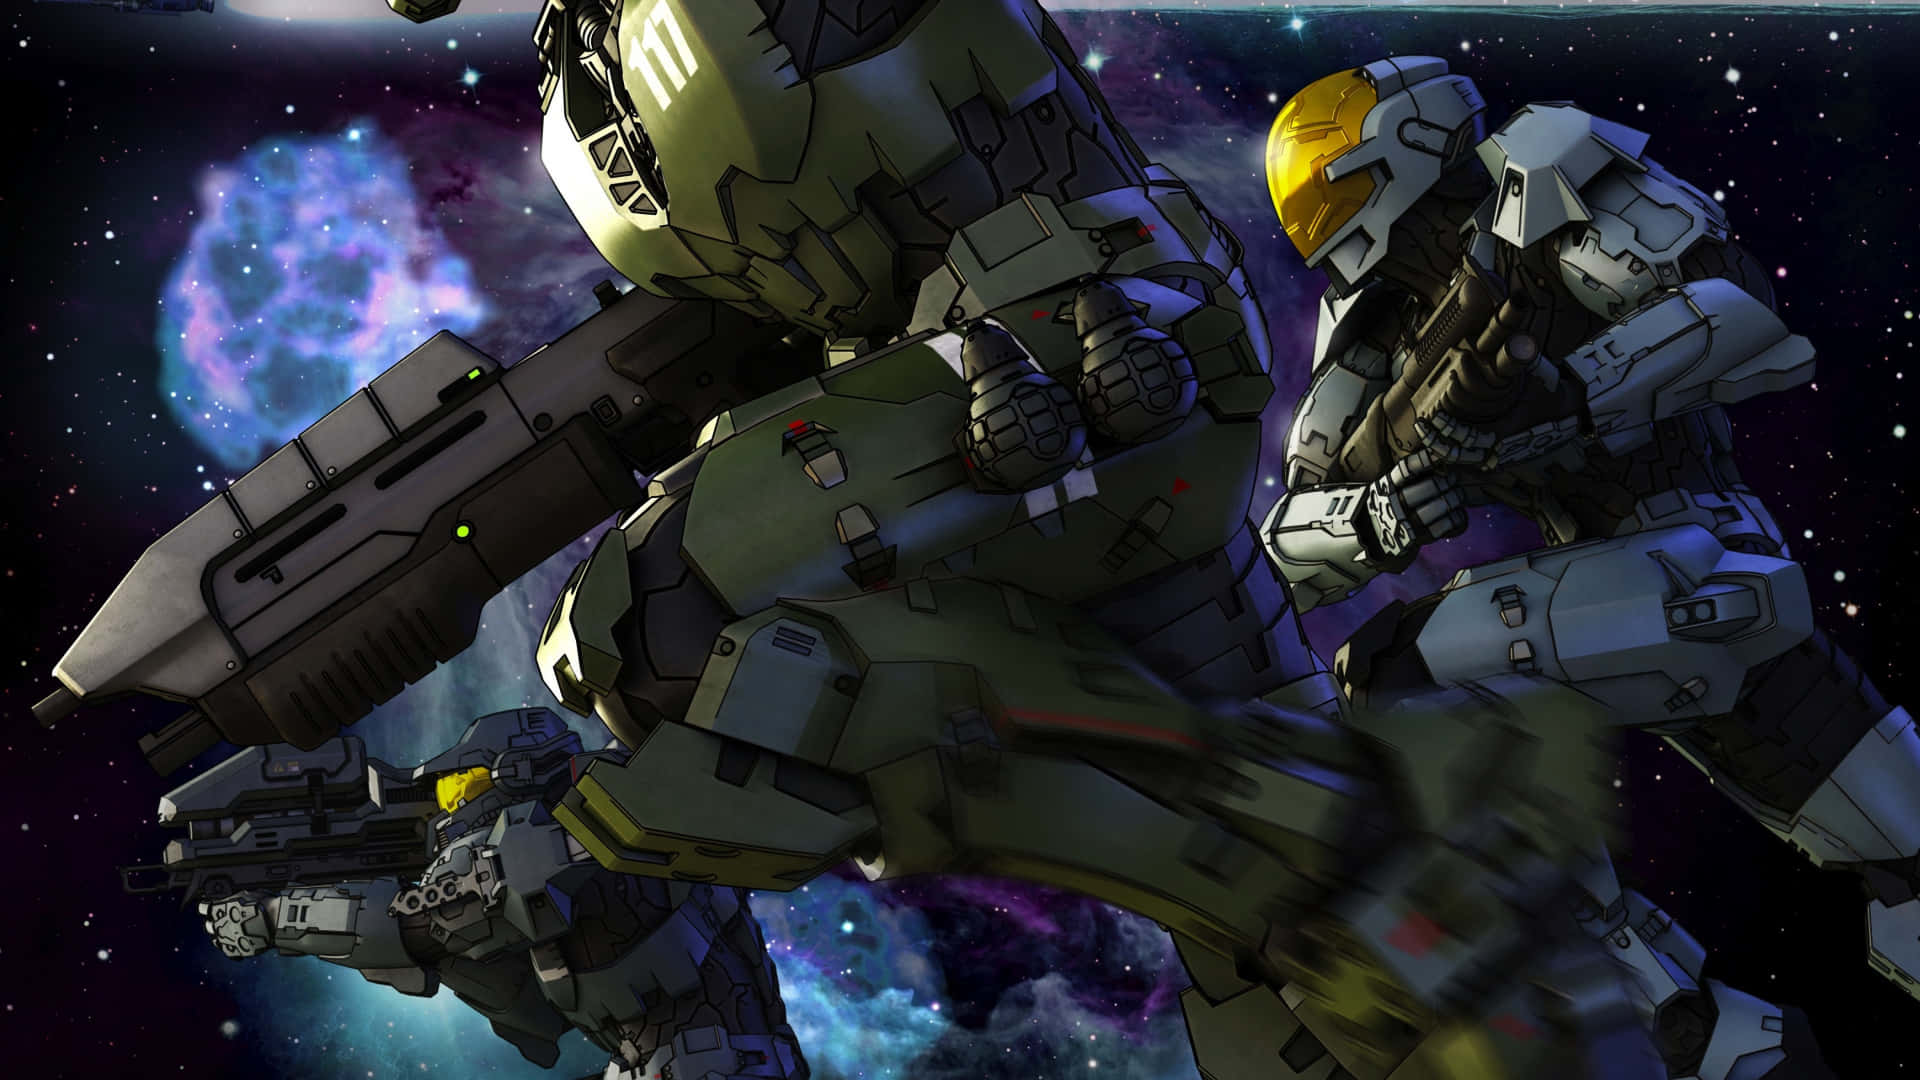 Master Chief and Blue Team ready for action in Halo 5: Guardians Wallpaper